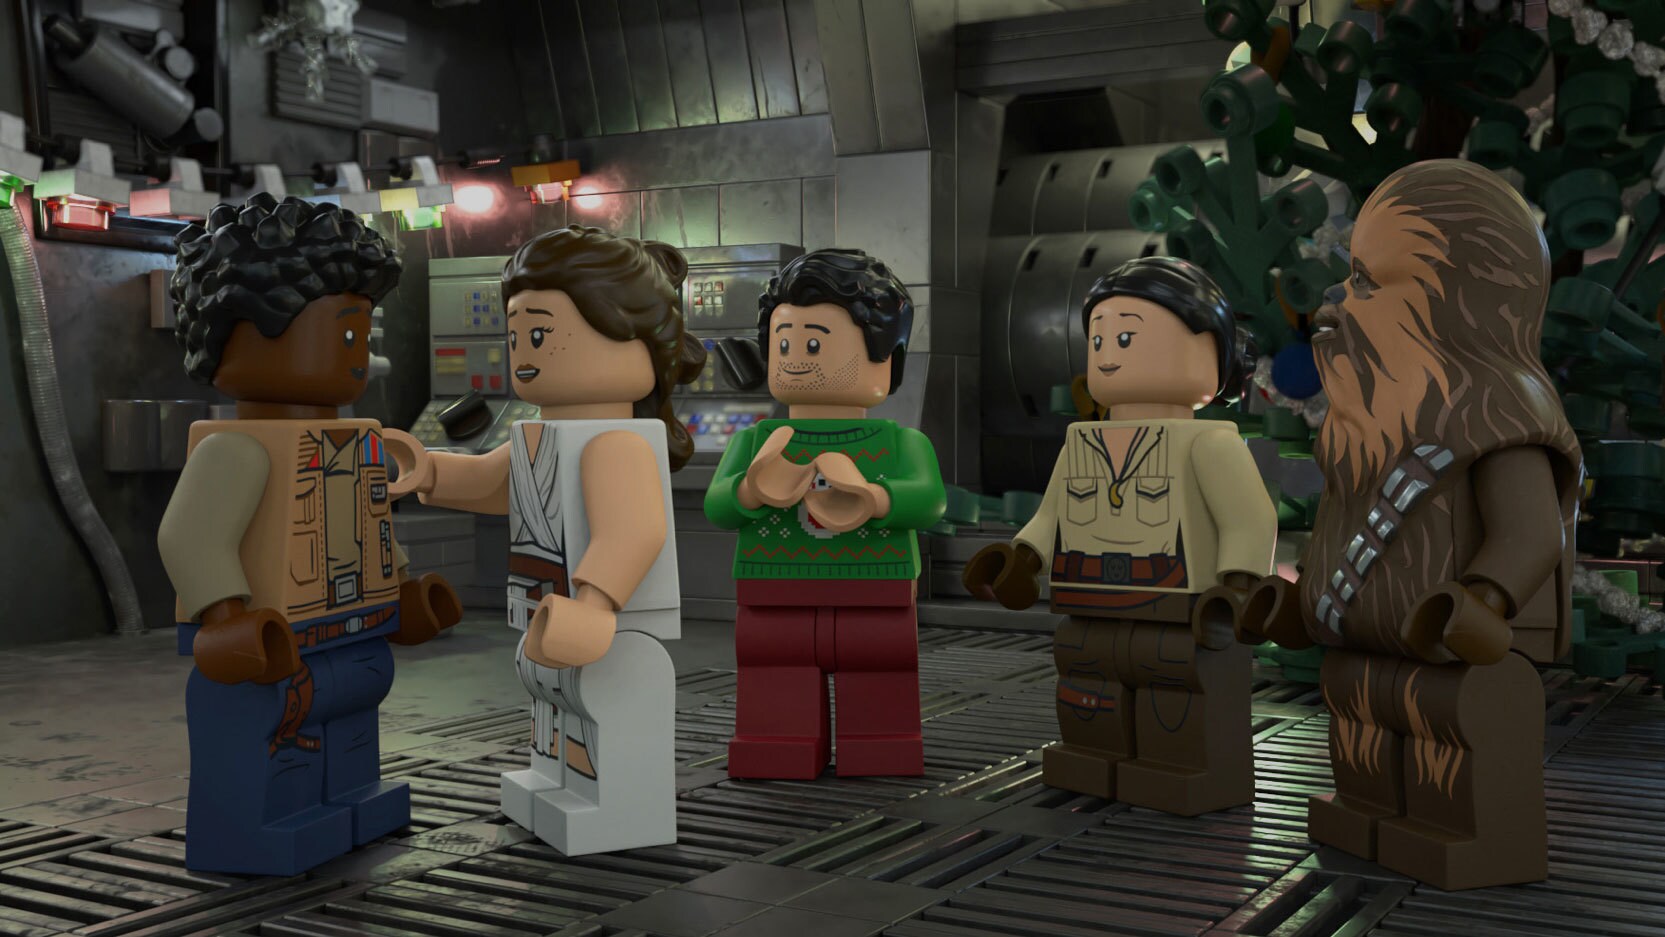 Disney+ shares “LEGO Star Wars Holiday Special” trailer and key art